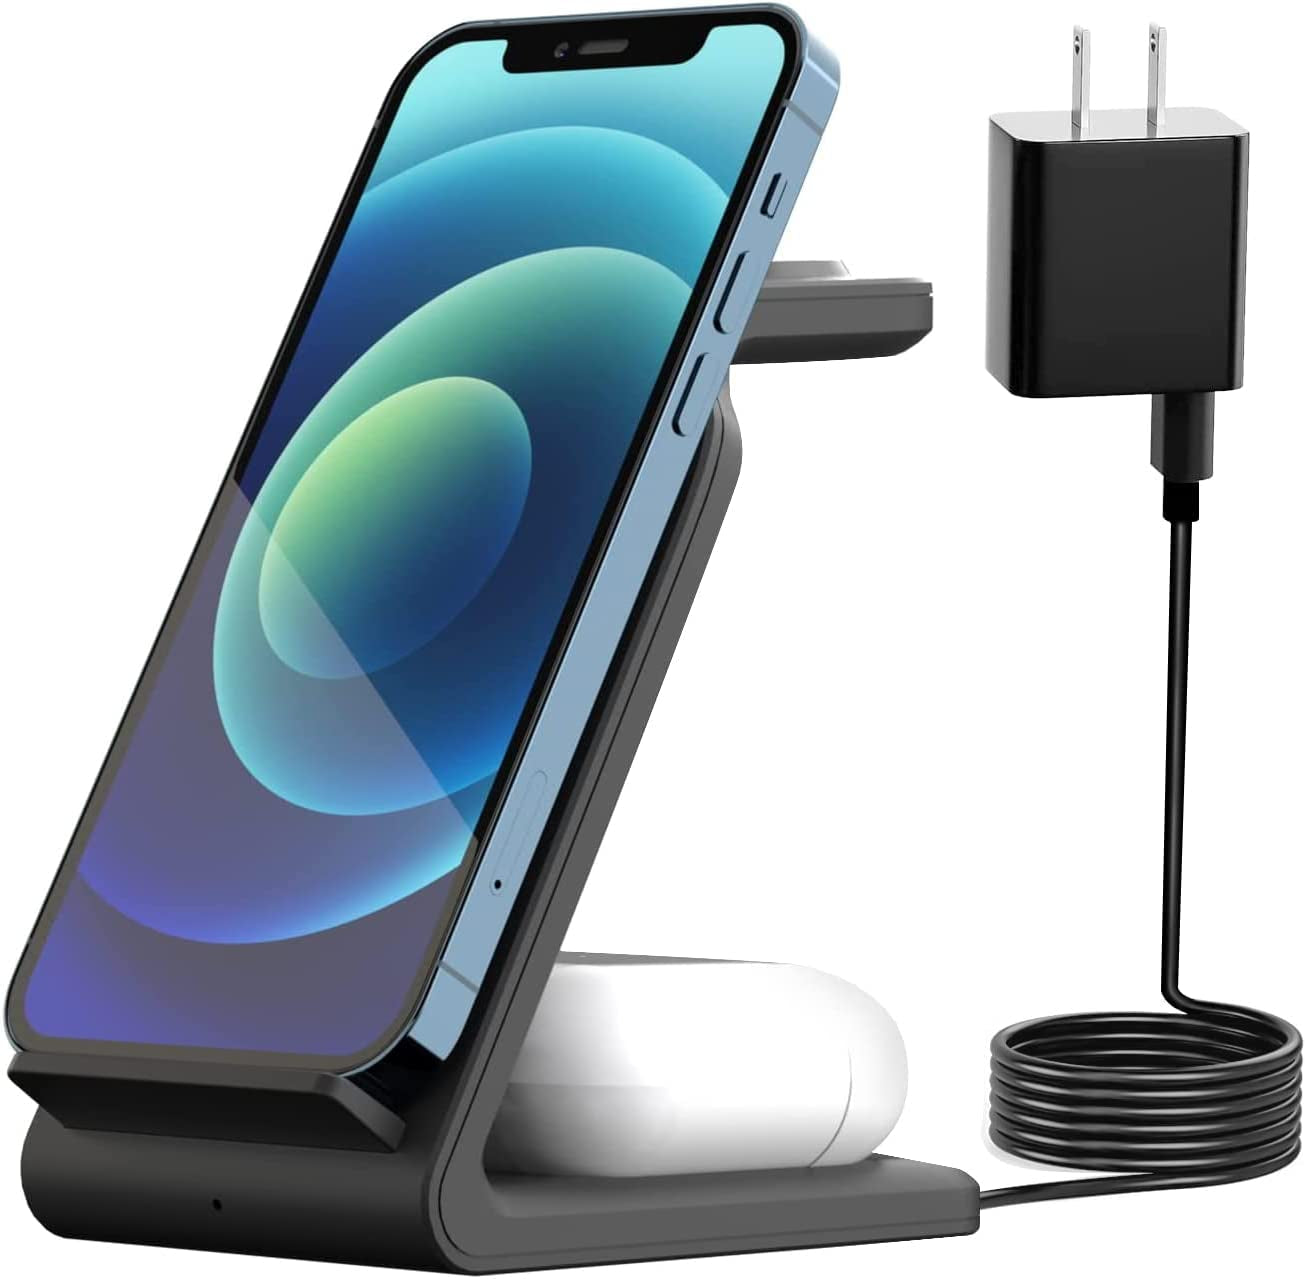 Wireless Charging Station, 3 in 1 Multi-Function Apple/Android Wireless Charger, Compatible with QI Standard Devices